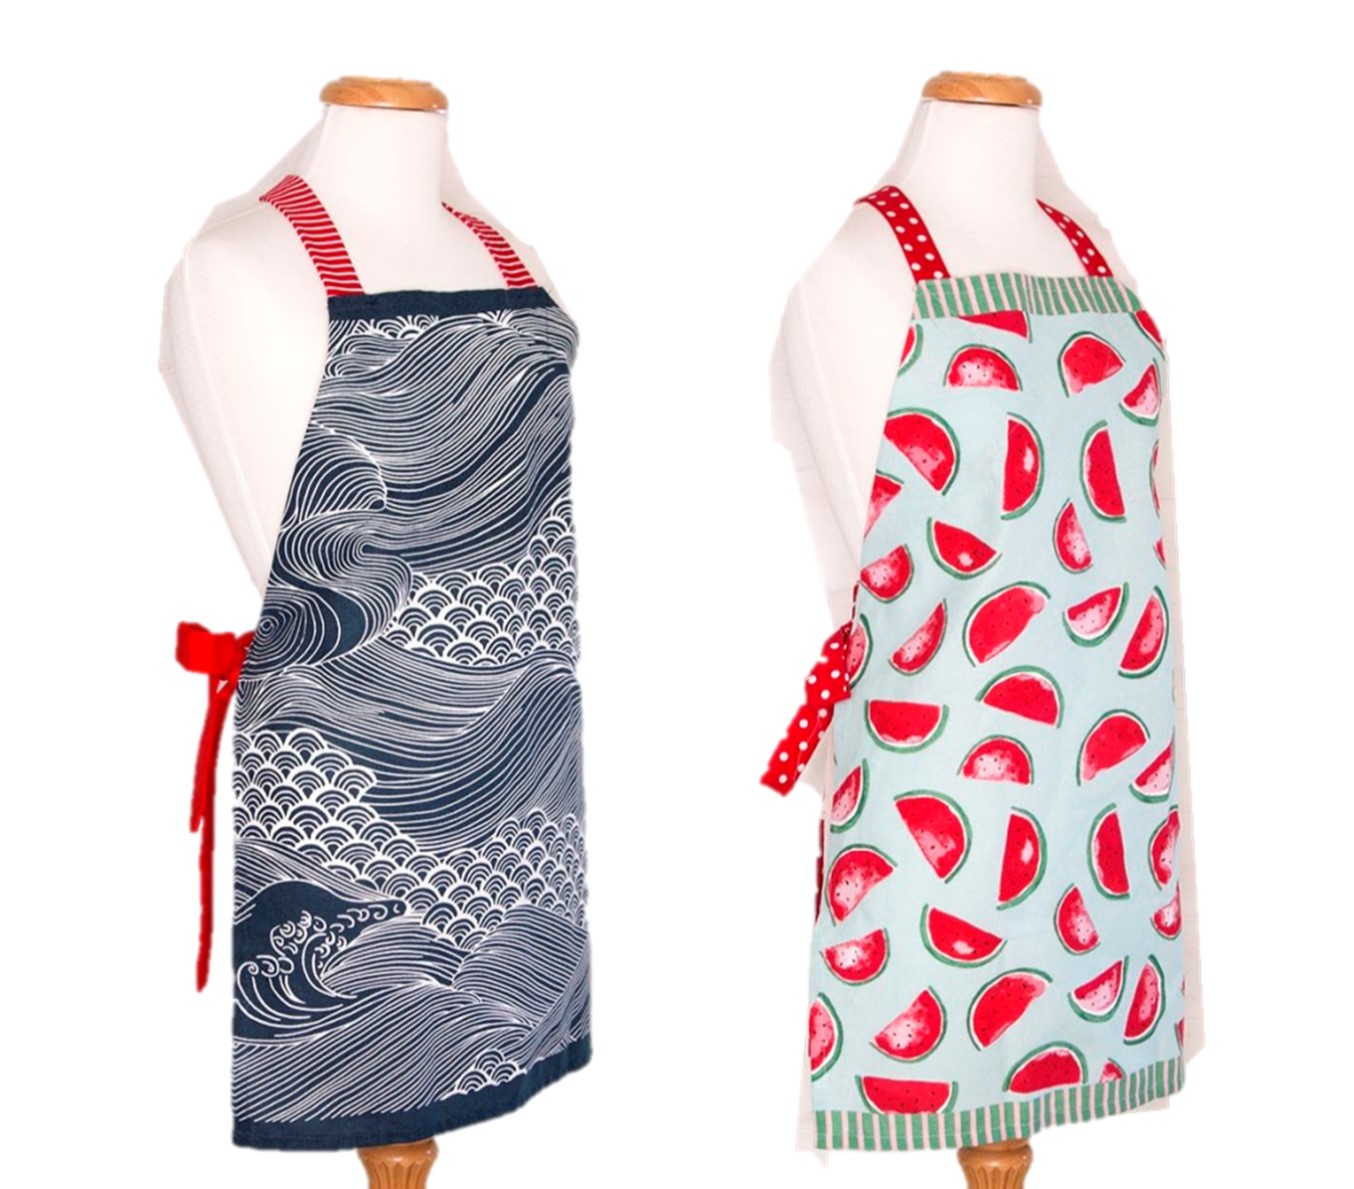 Two aprons on mannequins